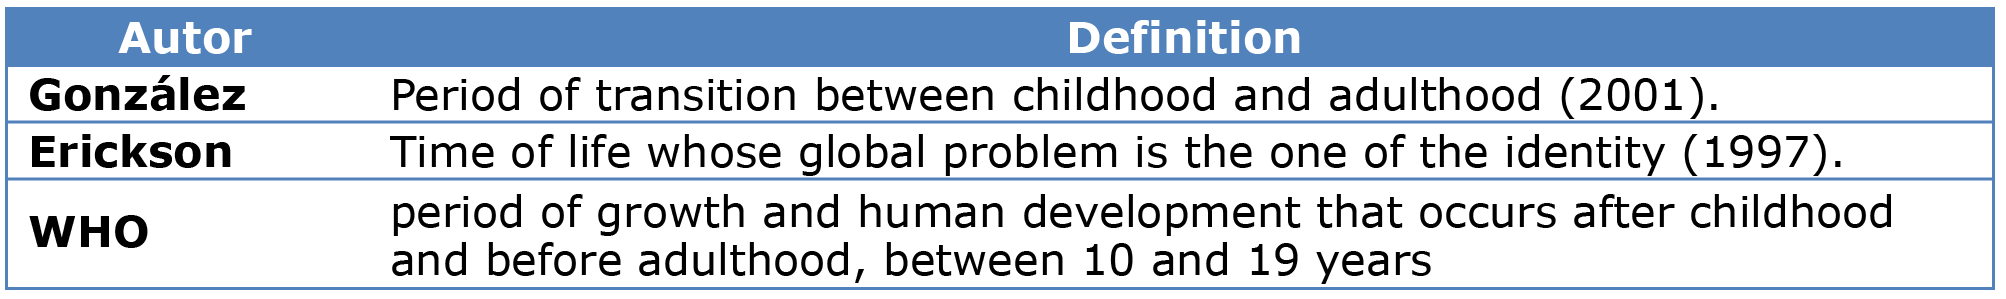 Definitions of adolescence by González, Erickson and the WHO